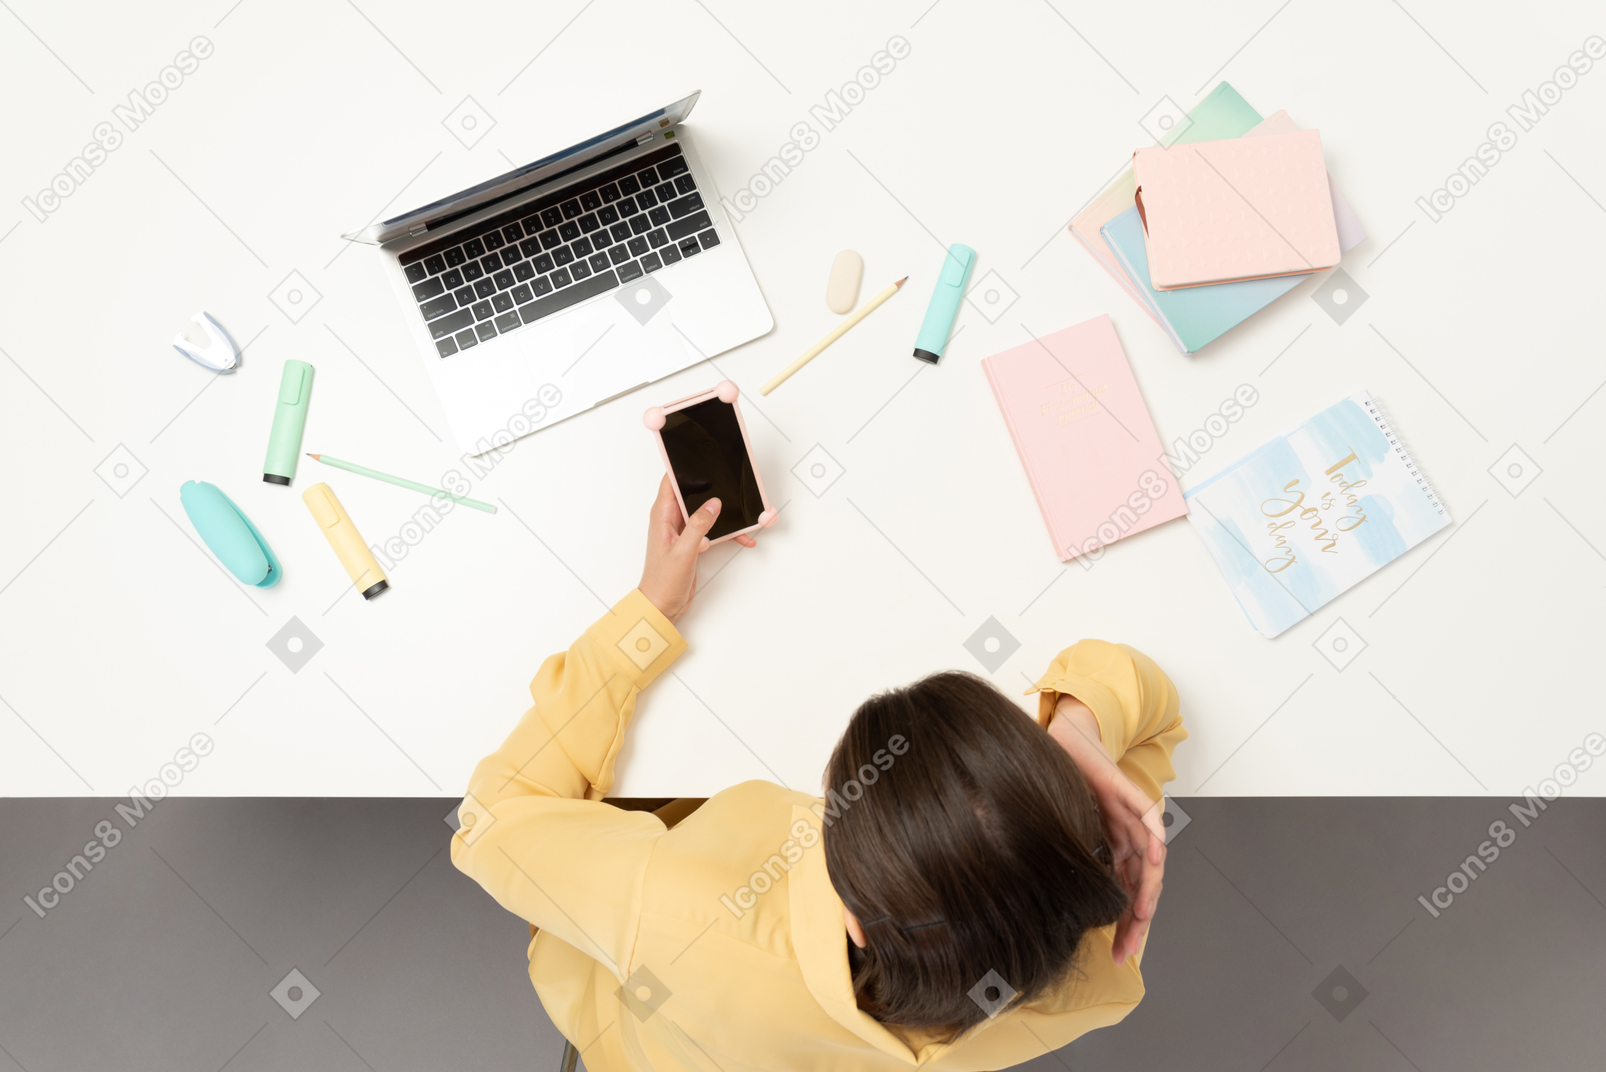 A female office worker at the table holding phone